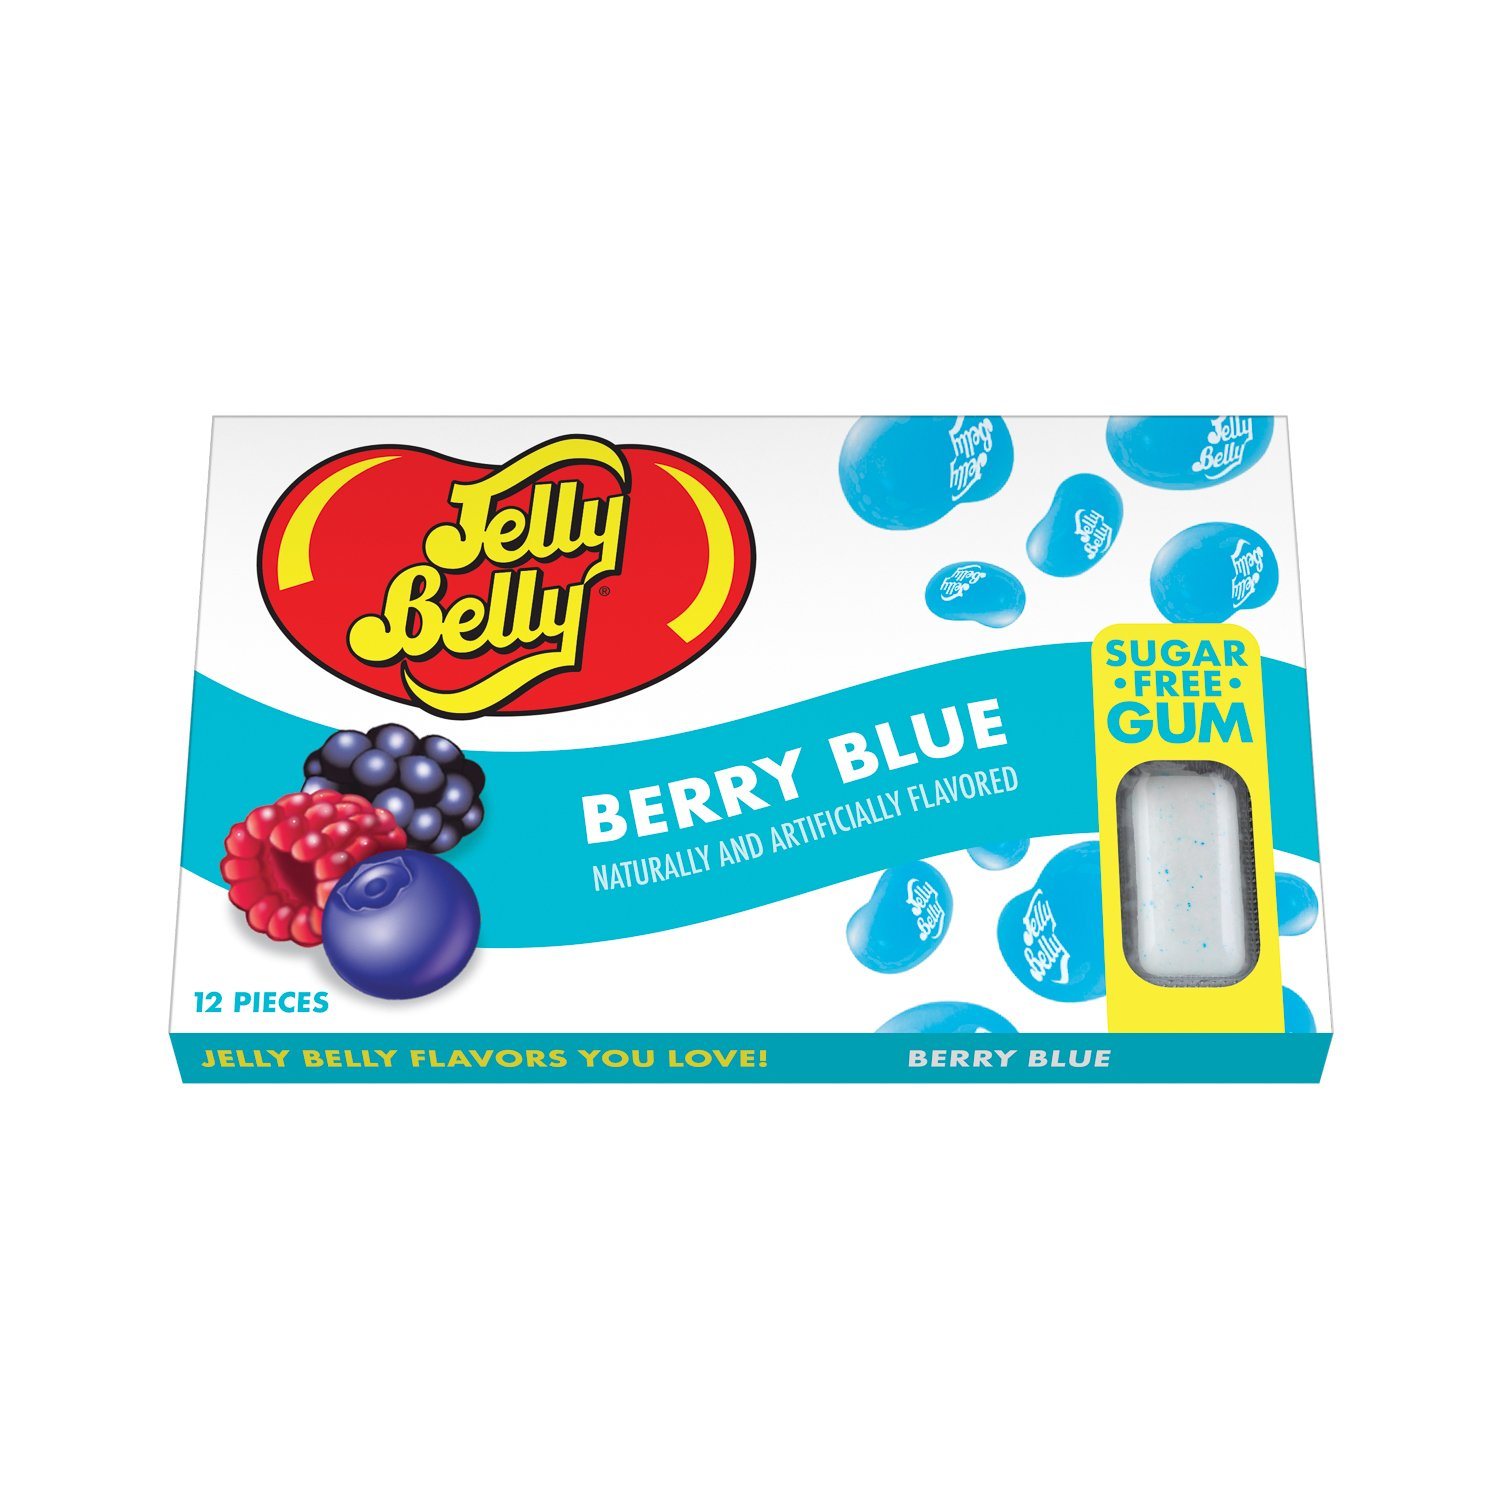 Jelly Belly Sugar Free Gum Jelly Belly Berry Blue 12 Pieces 